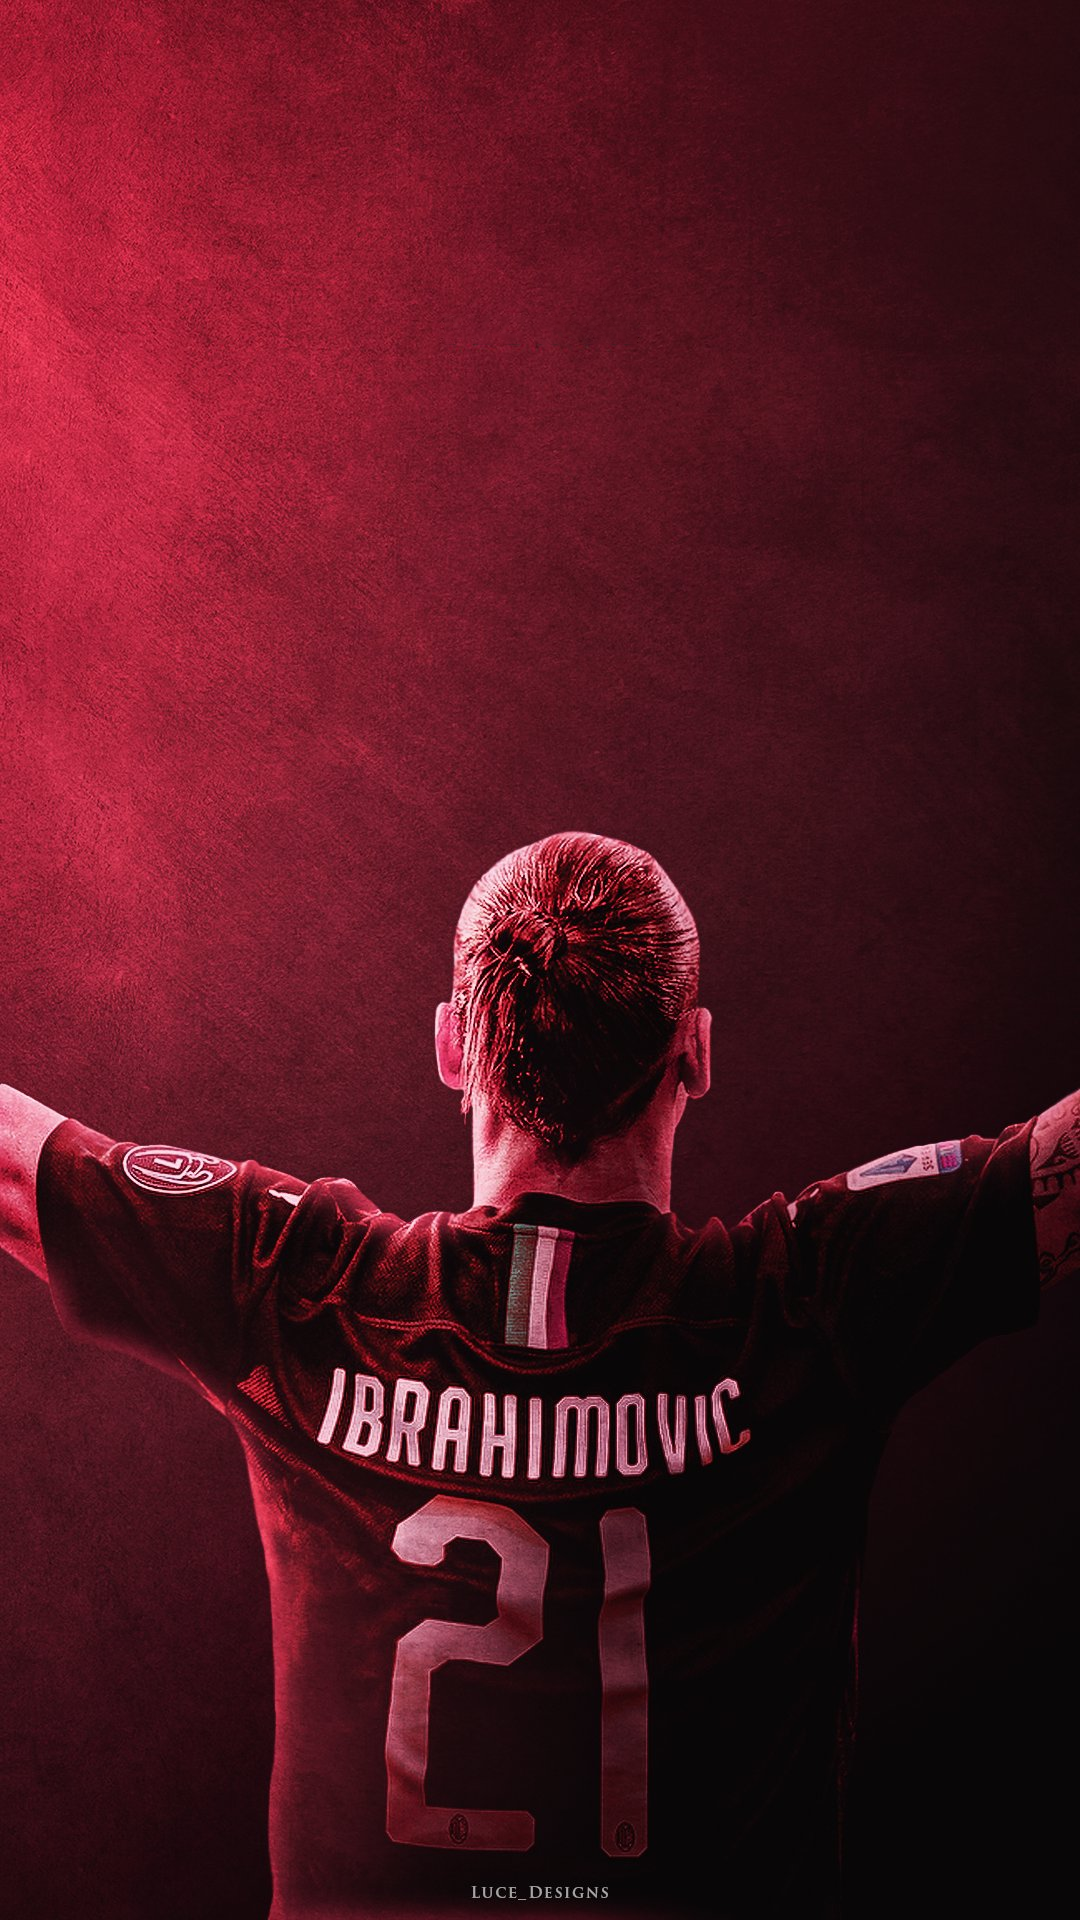 Check Out This Ibrahimovic Phone Wallpaper Done By Luce